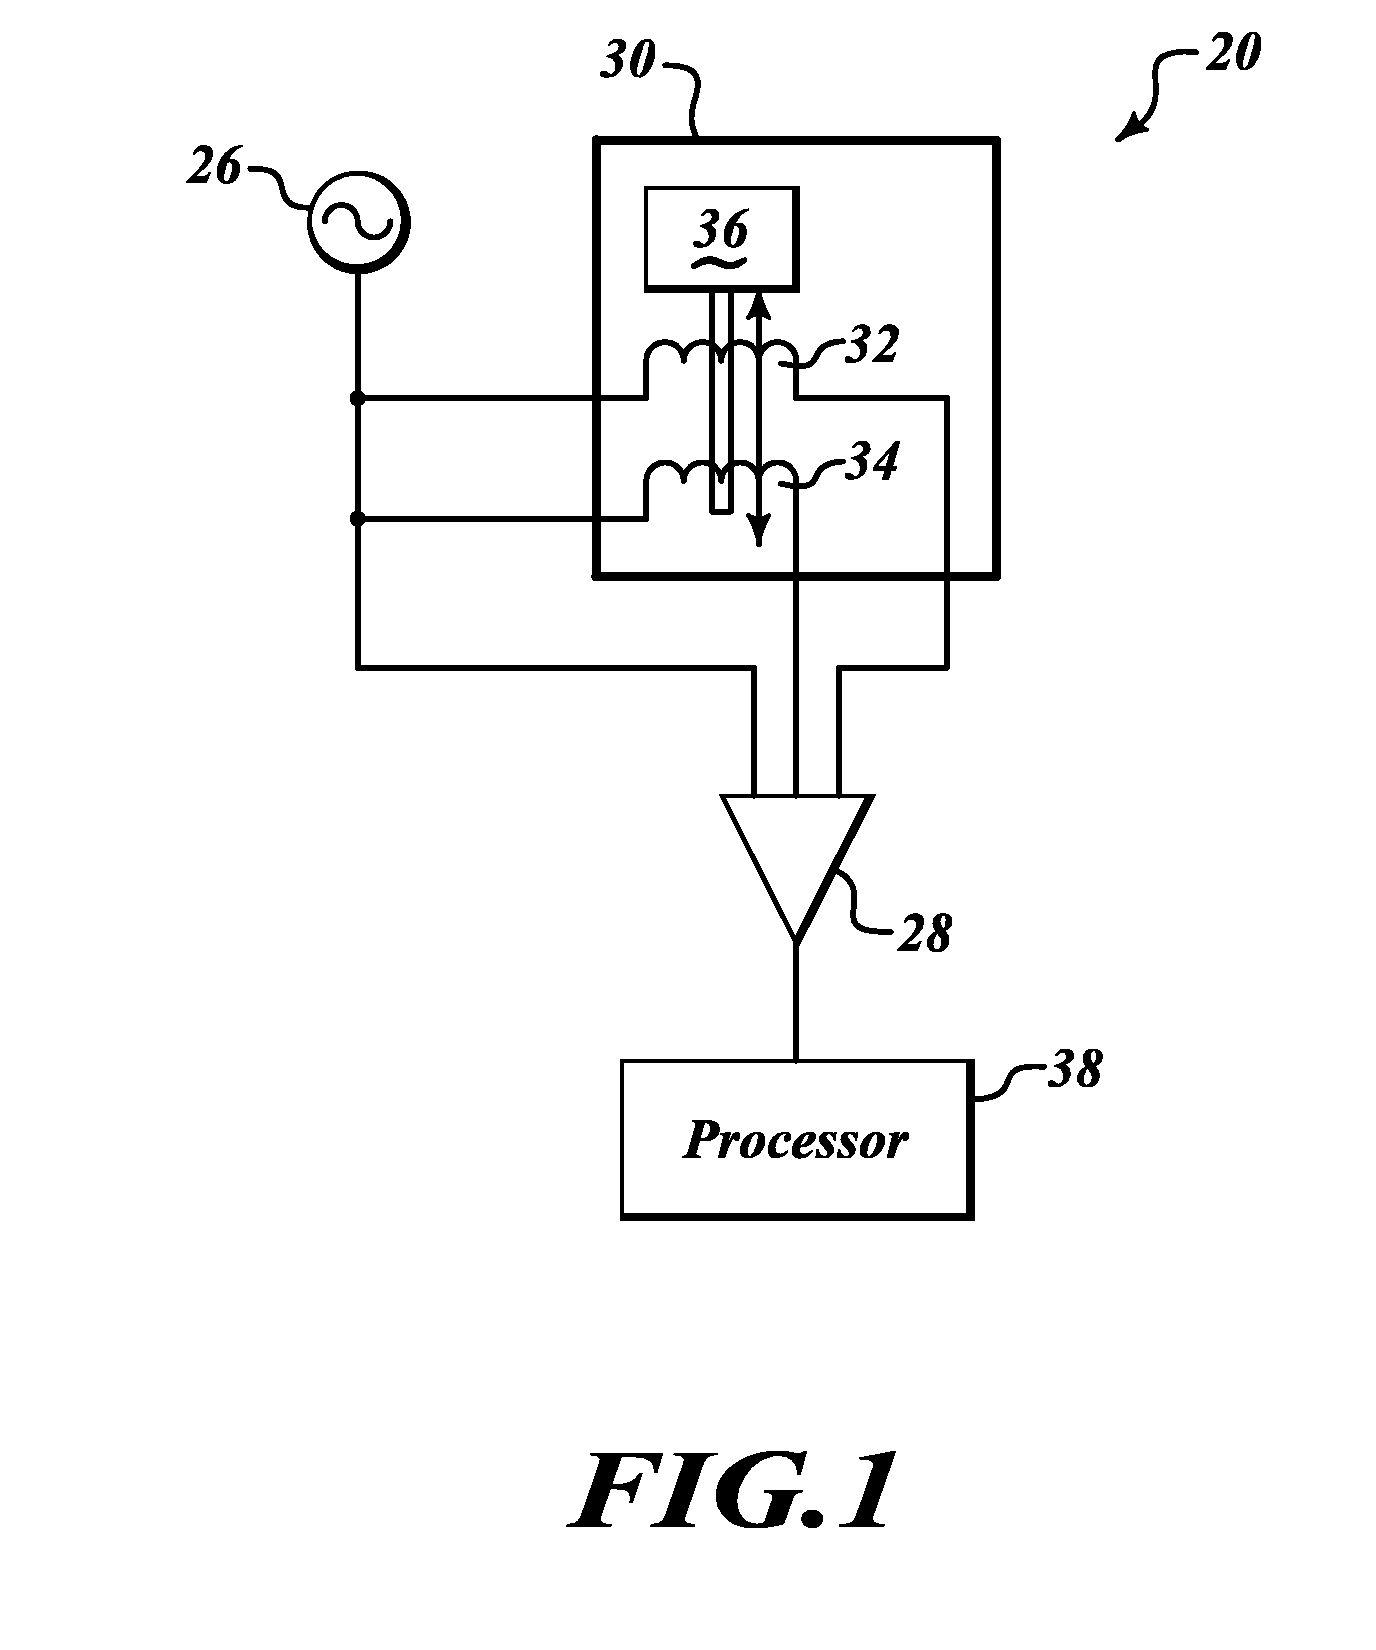 Systems and methods for performing vibration analysis using a variable-reluctance sensor